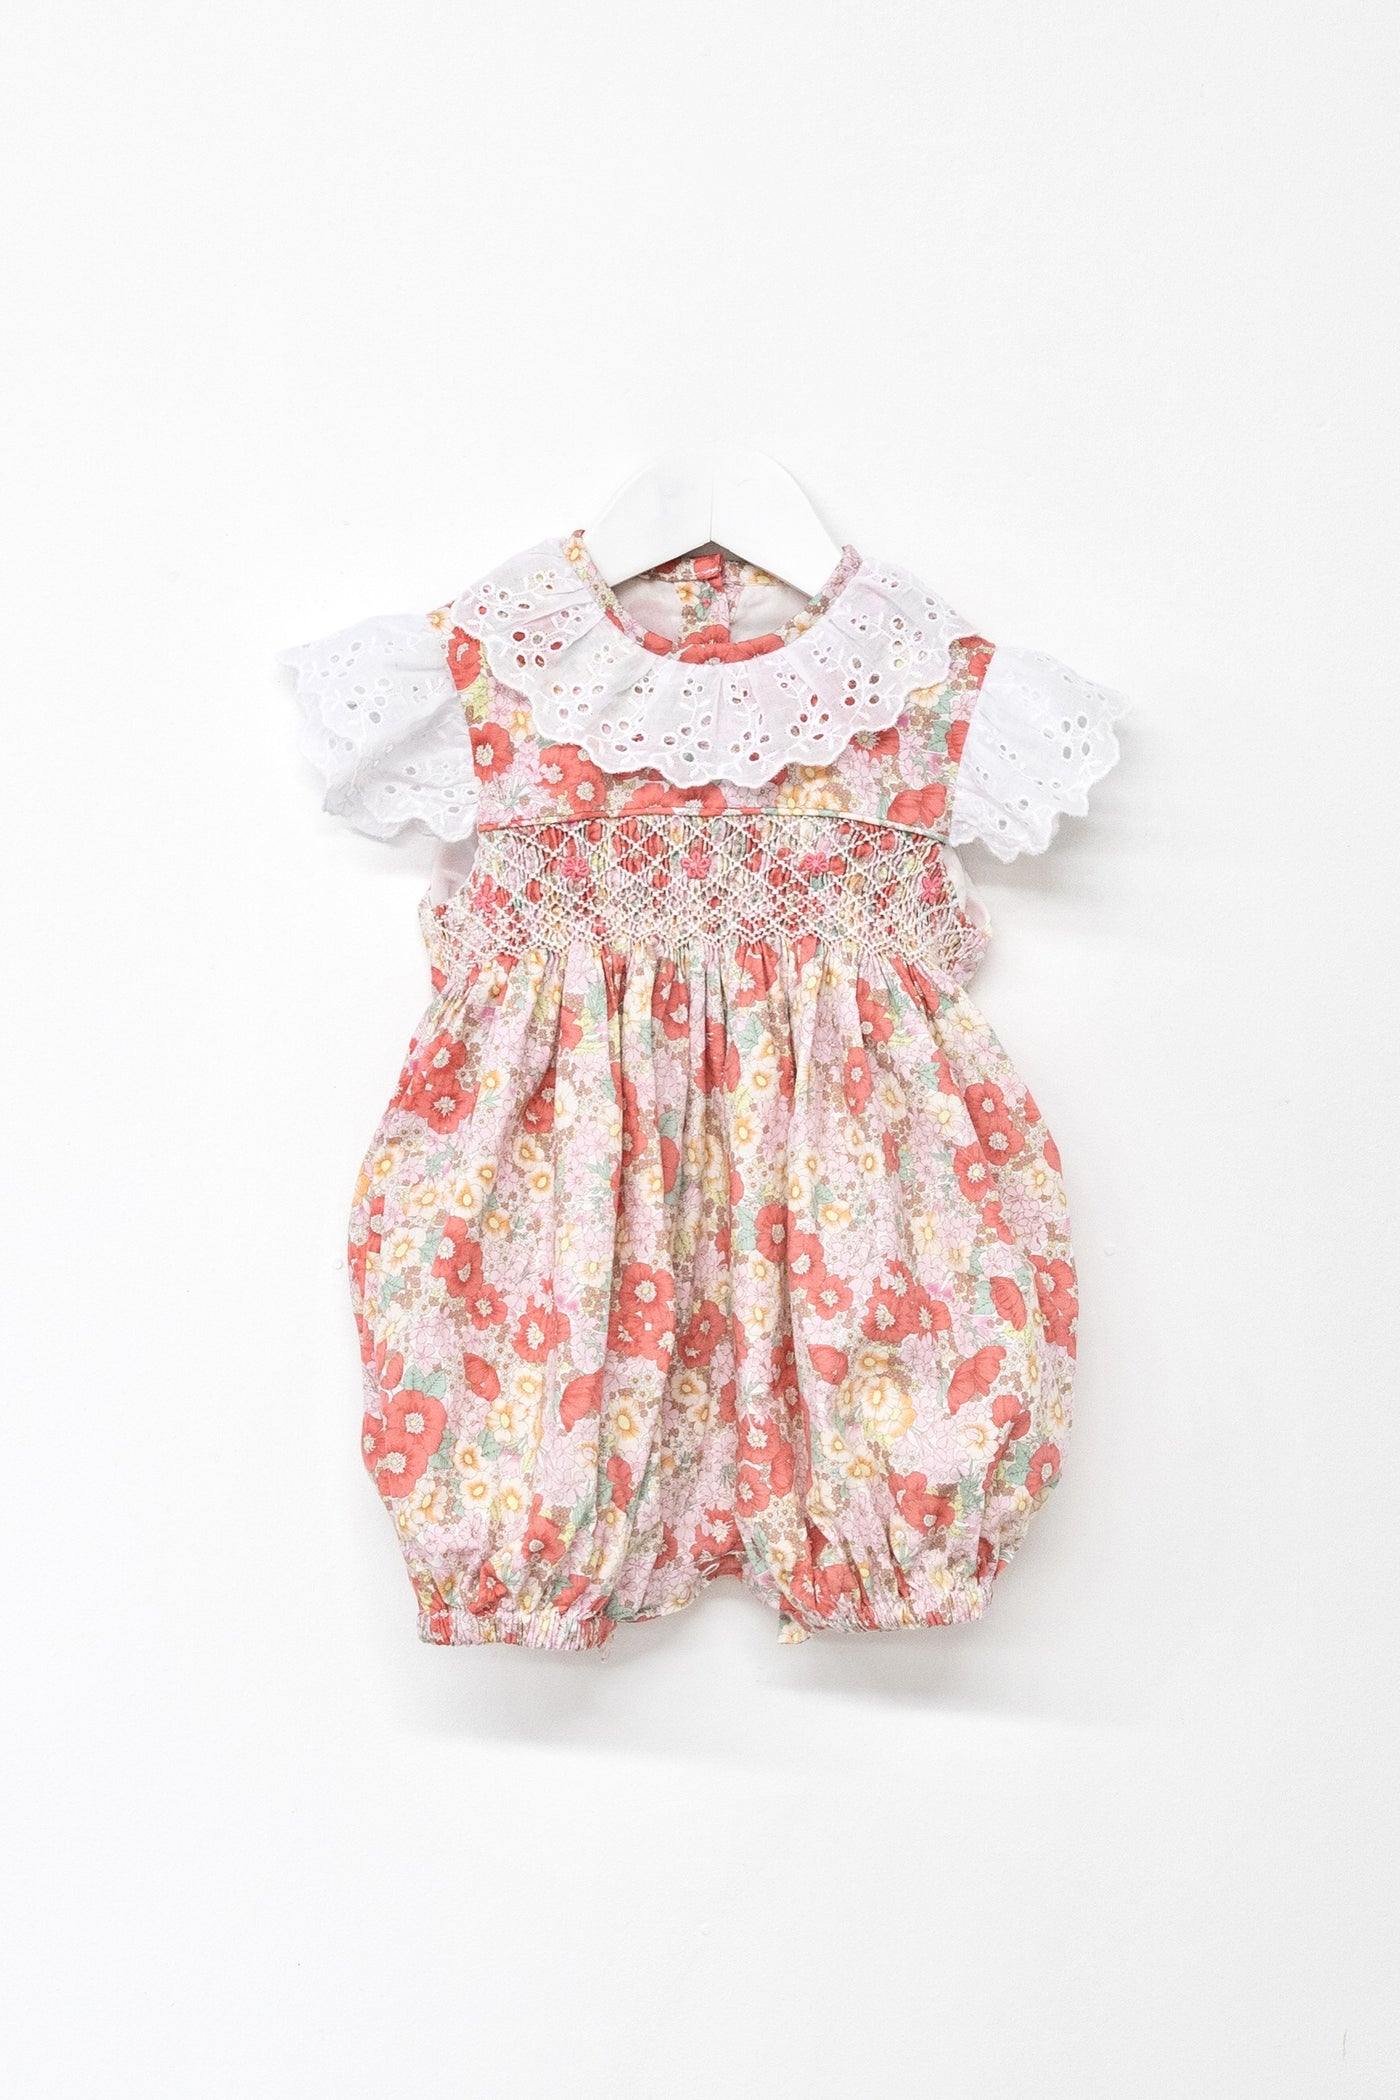 Smox Rox All You Need Is Love Poppy romper